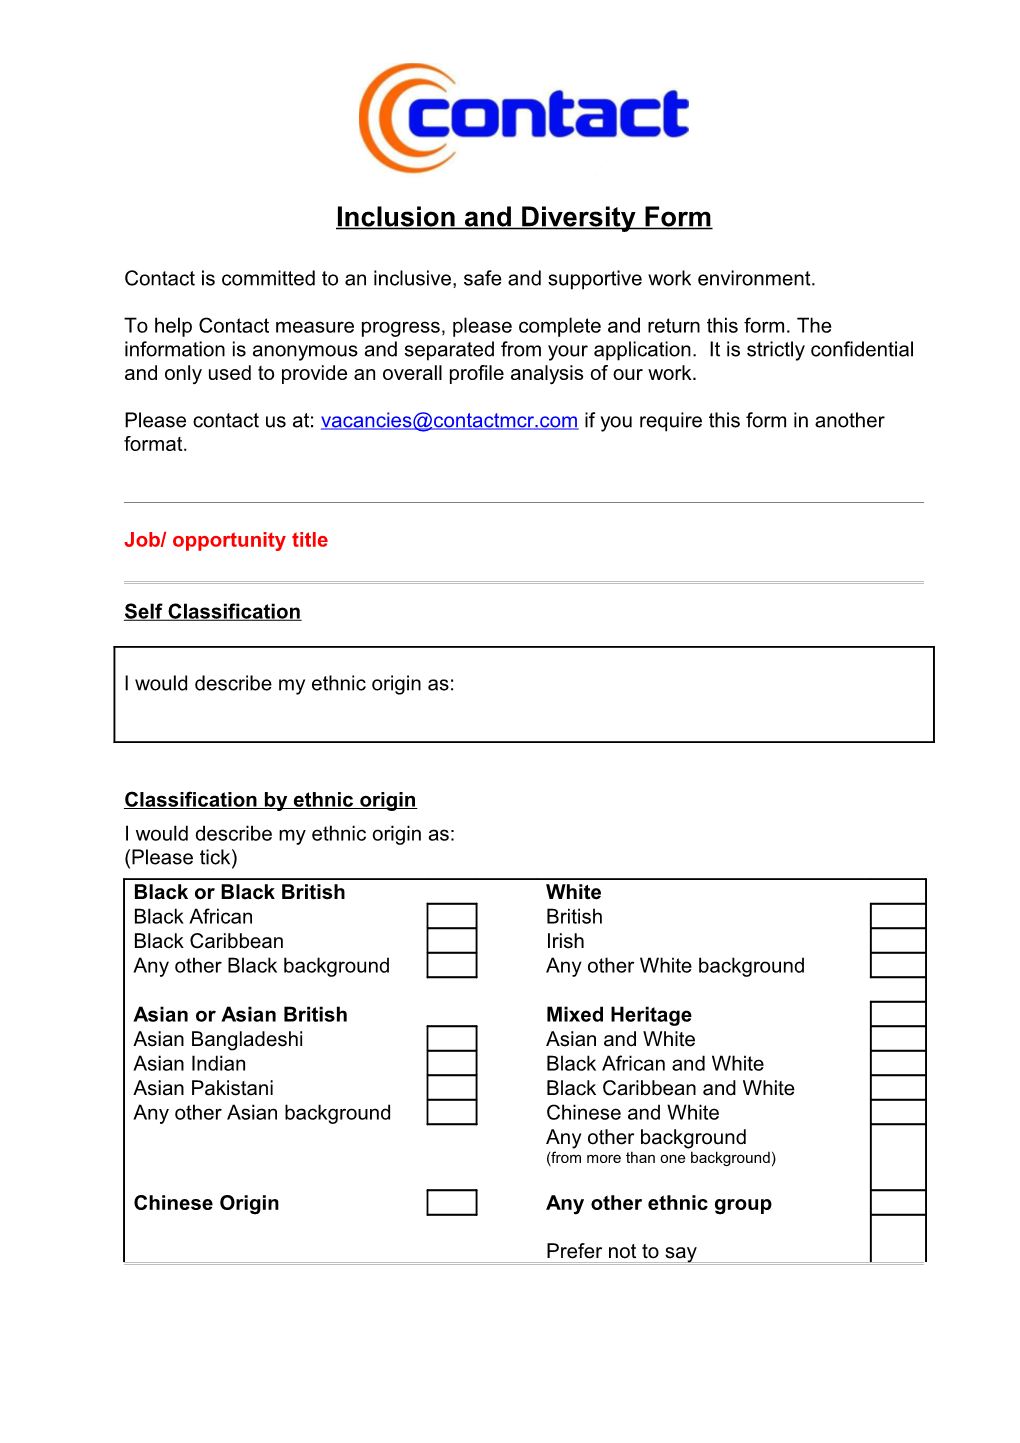 Inclusion and Diversity Form